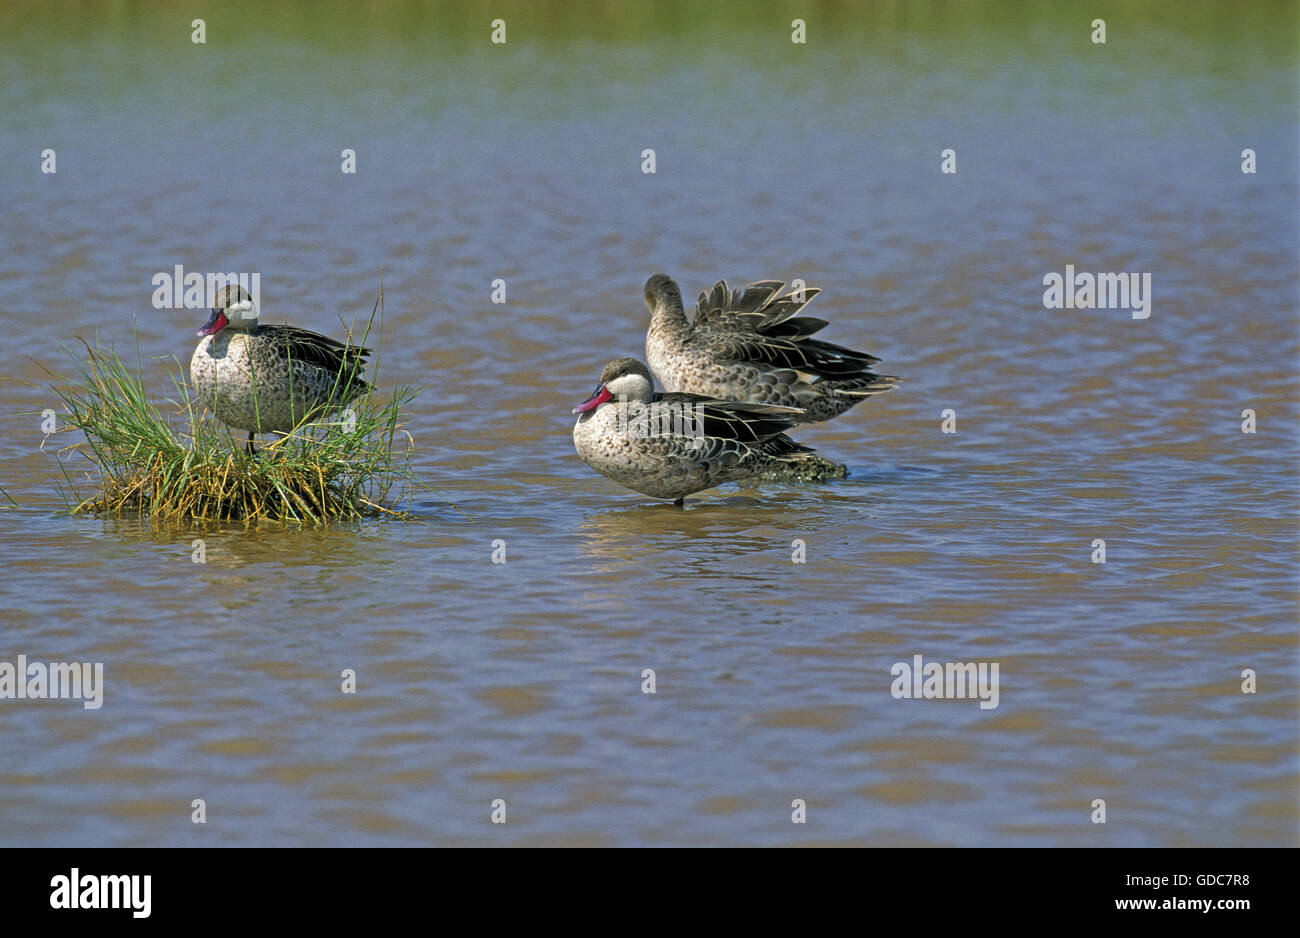 Red-Billed Teal, anas erythrorhyncha, Adults in Water, Kenya Stock Photo